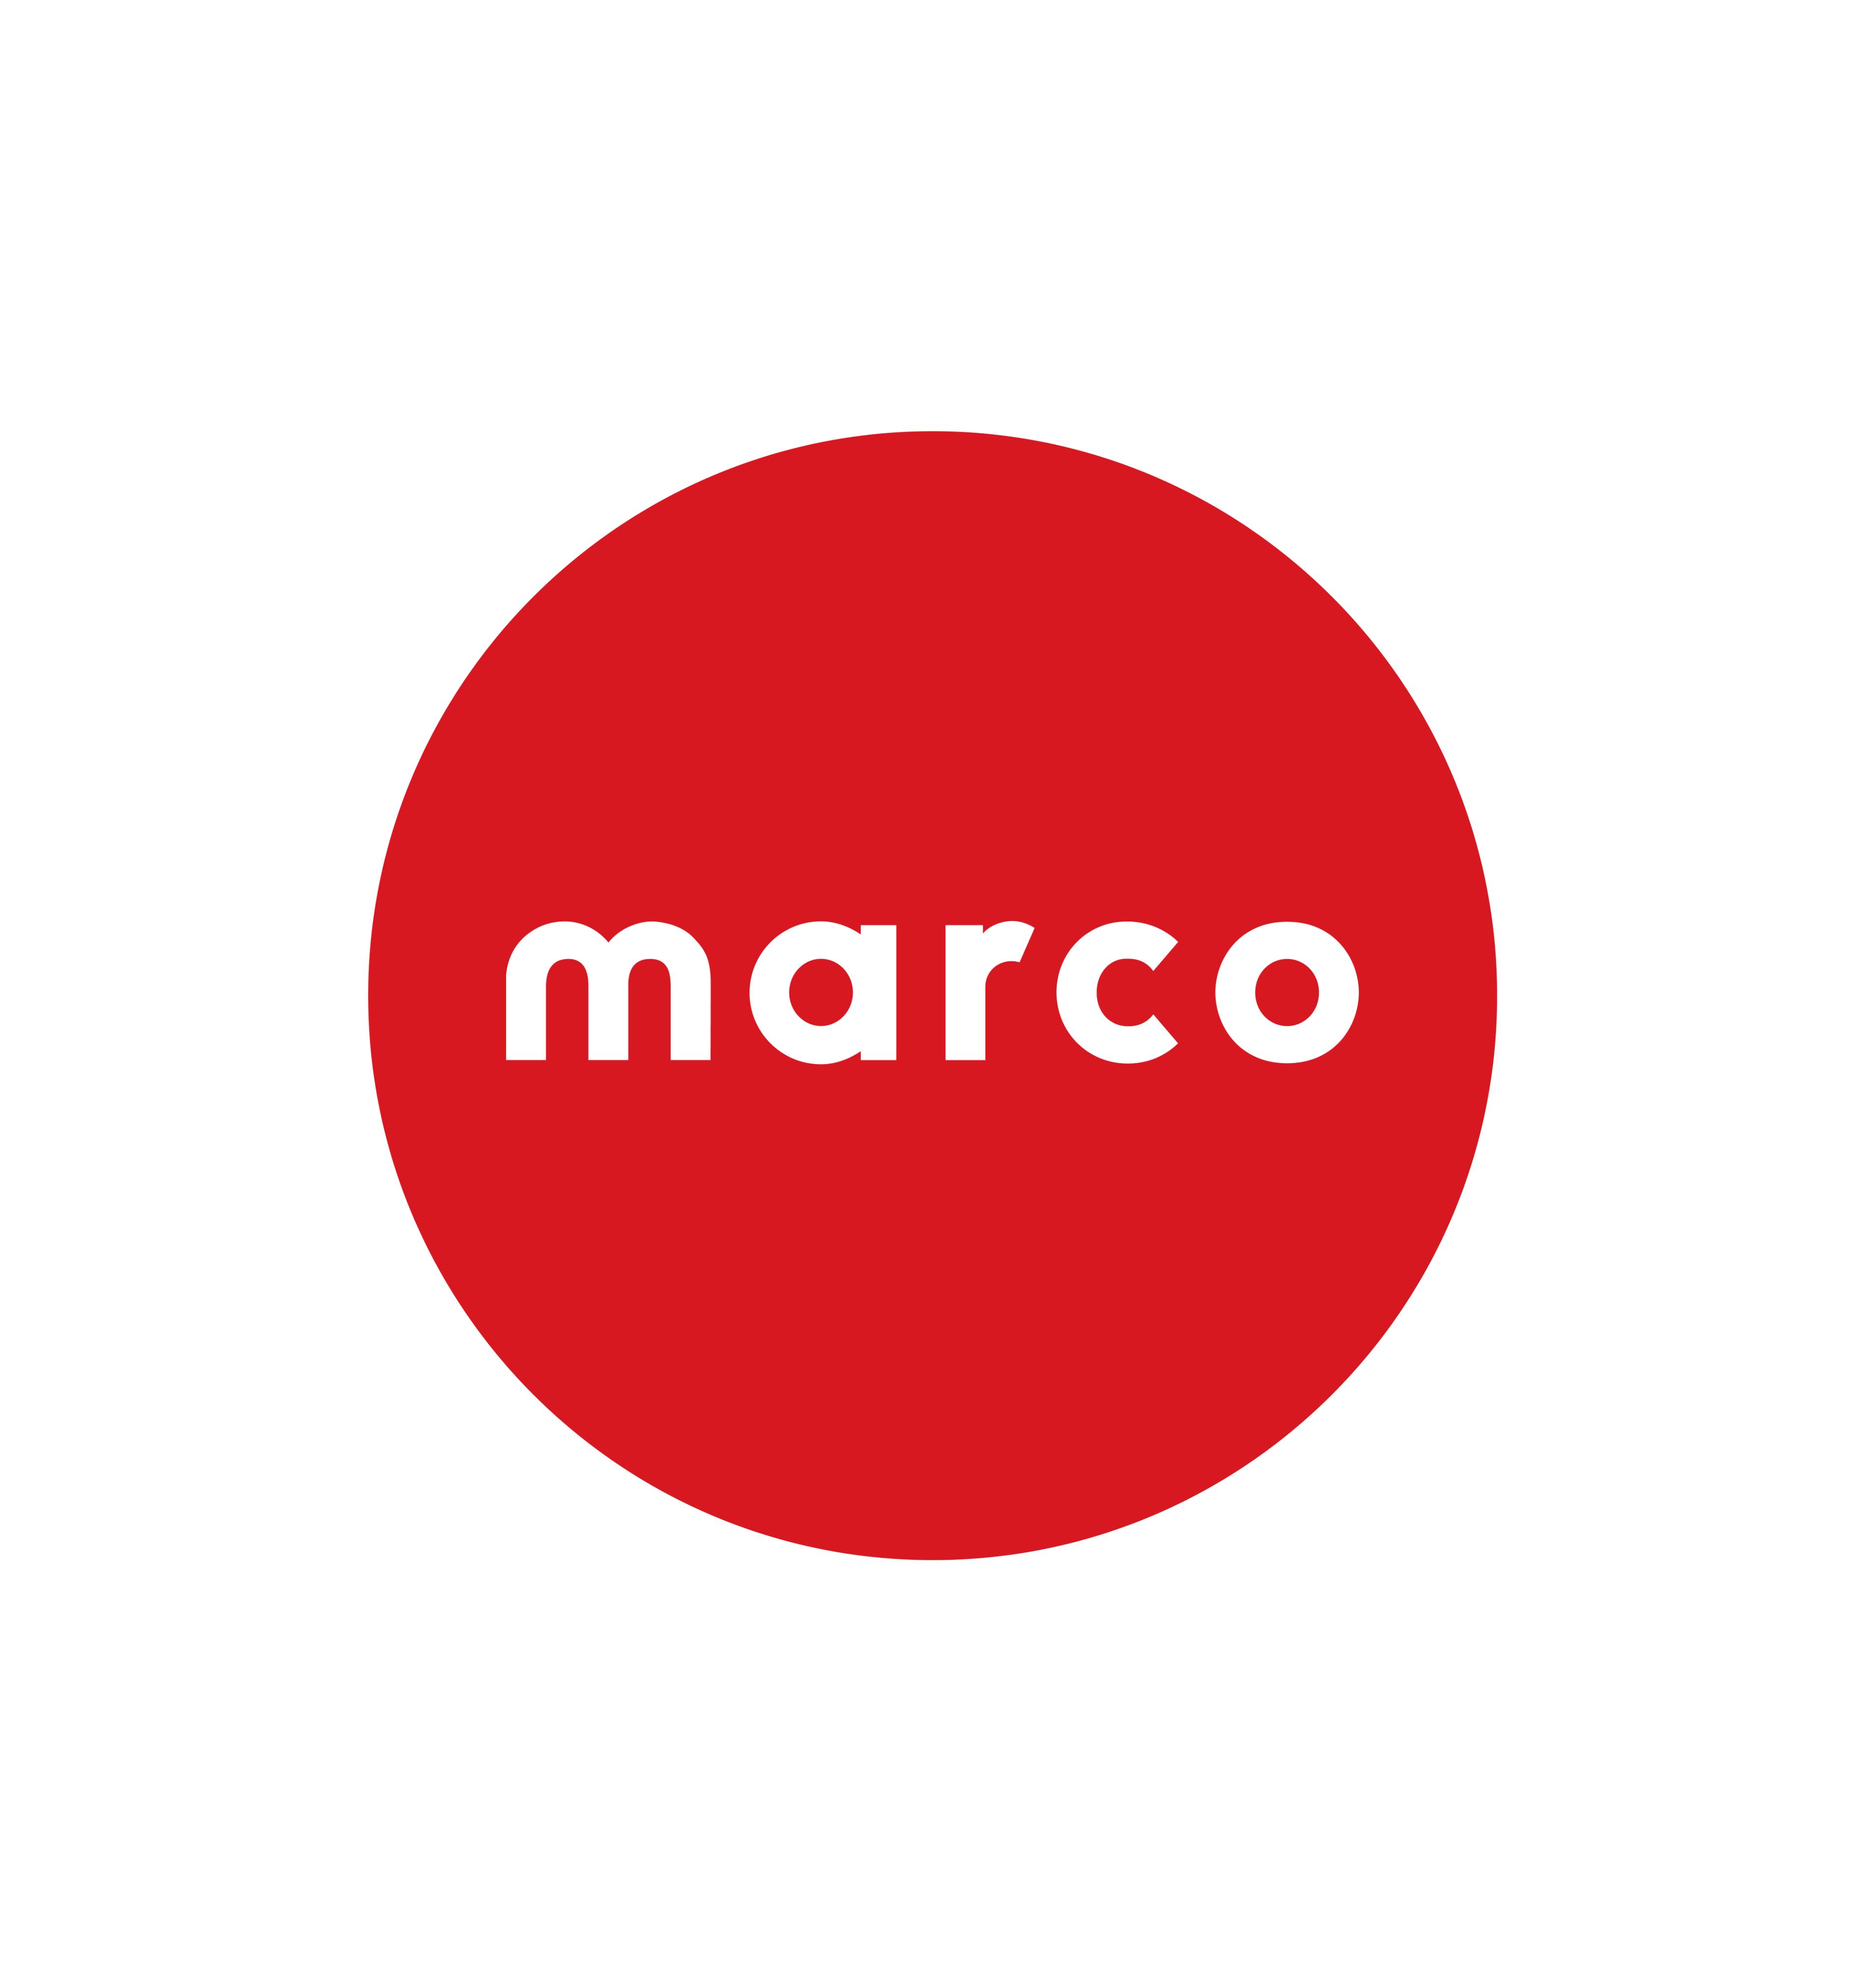 Marco Beverage Systems